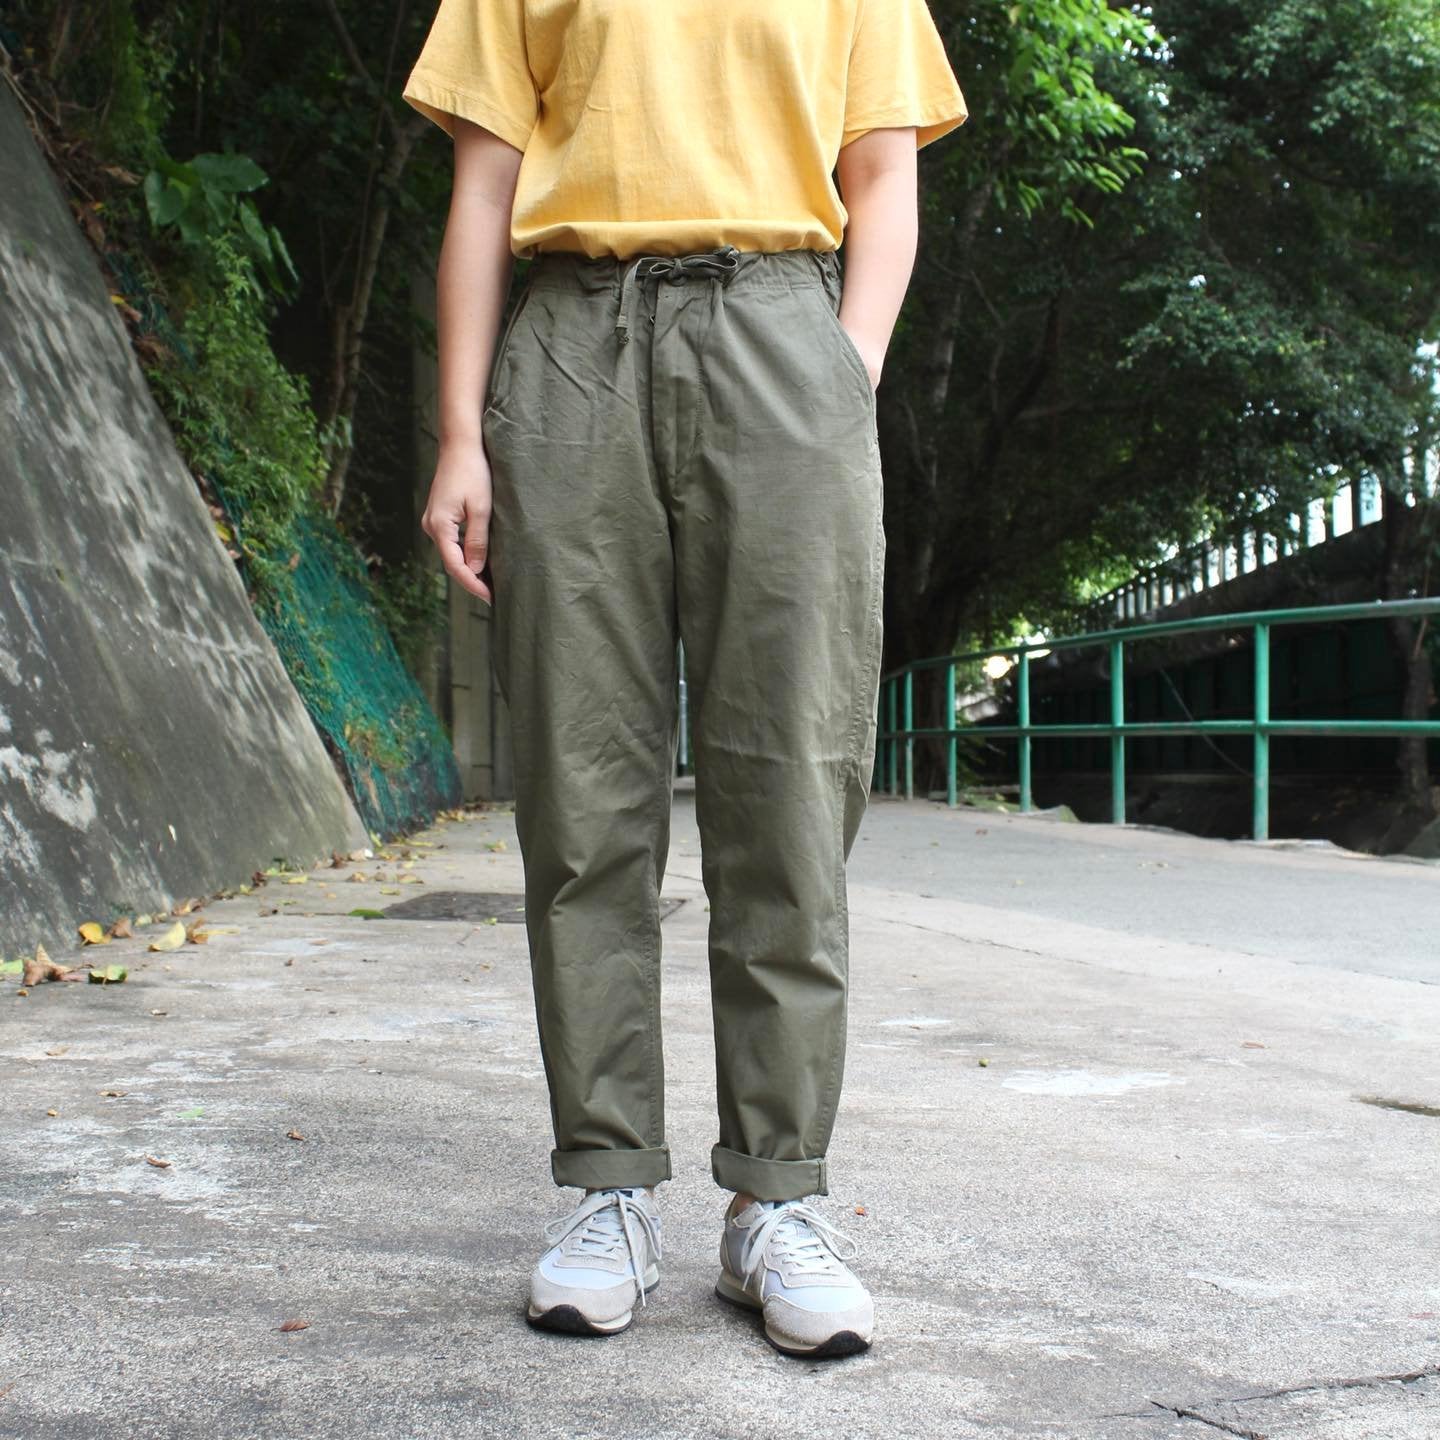 Or Slow - STANDARD ITEM NEW YORKER ARMY PANTS